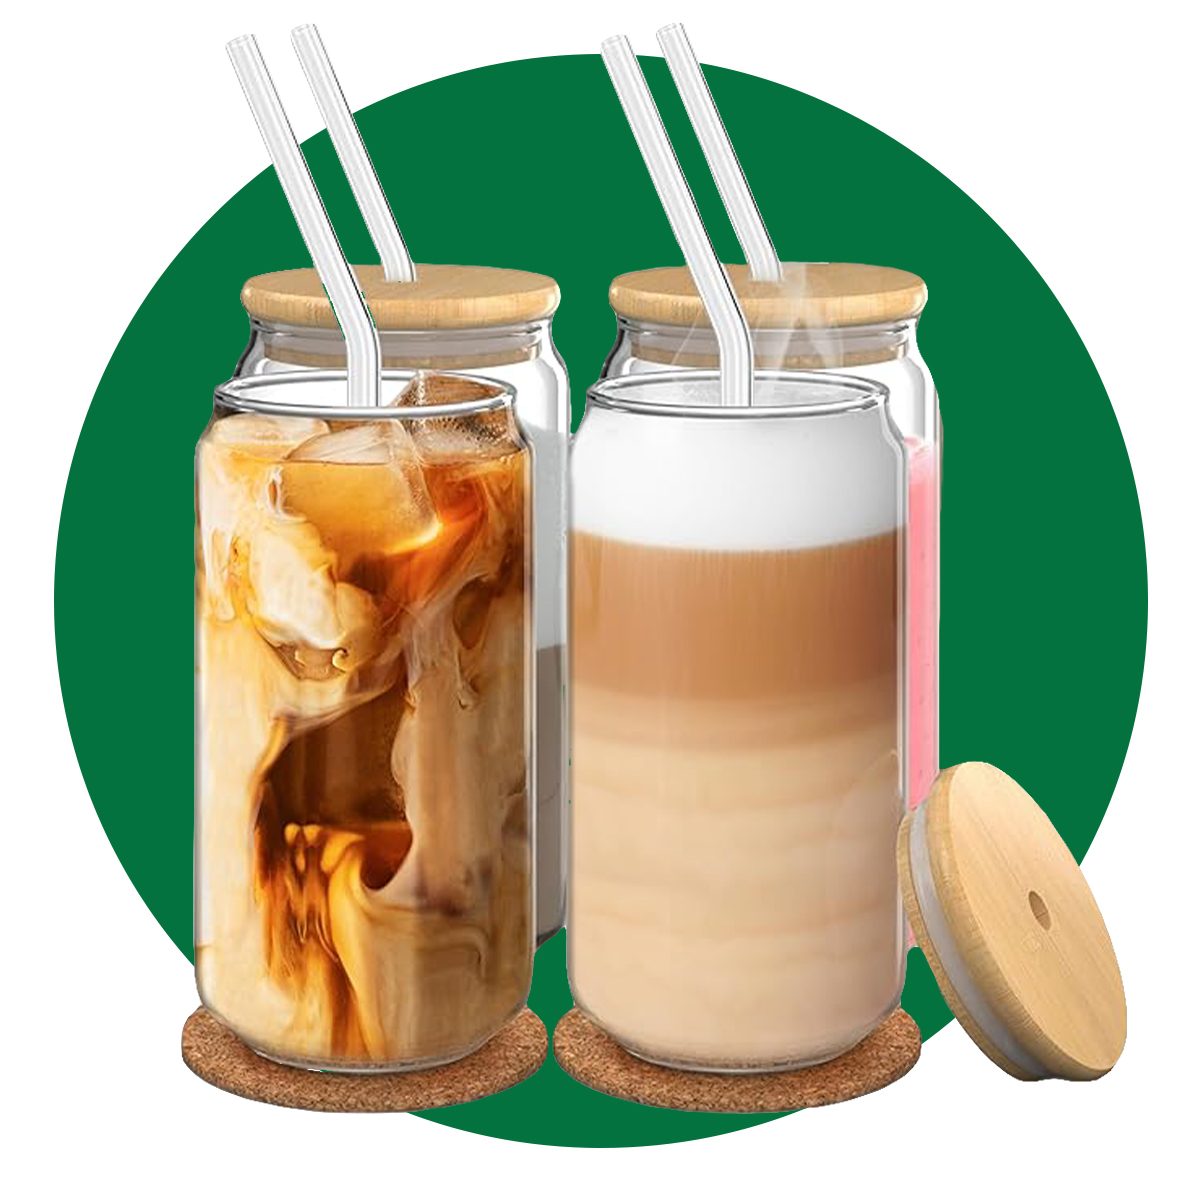 https://www.thehealthy.com/wp-content/uploads/2023/12/TH-ecomm-Scoozee-Glass-Cups-with-Bamboo-Lids-and-Straws-via-amazon.com_.jpg?fit=700%2C700